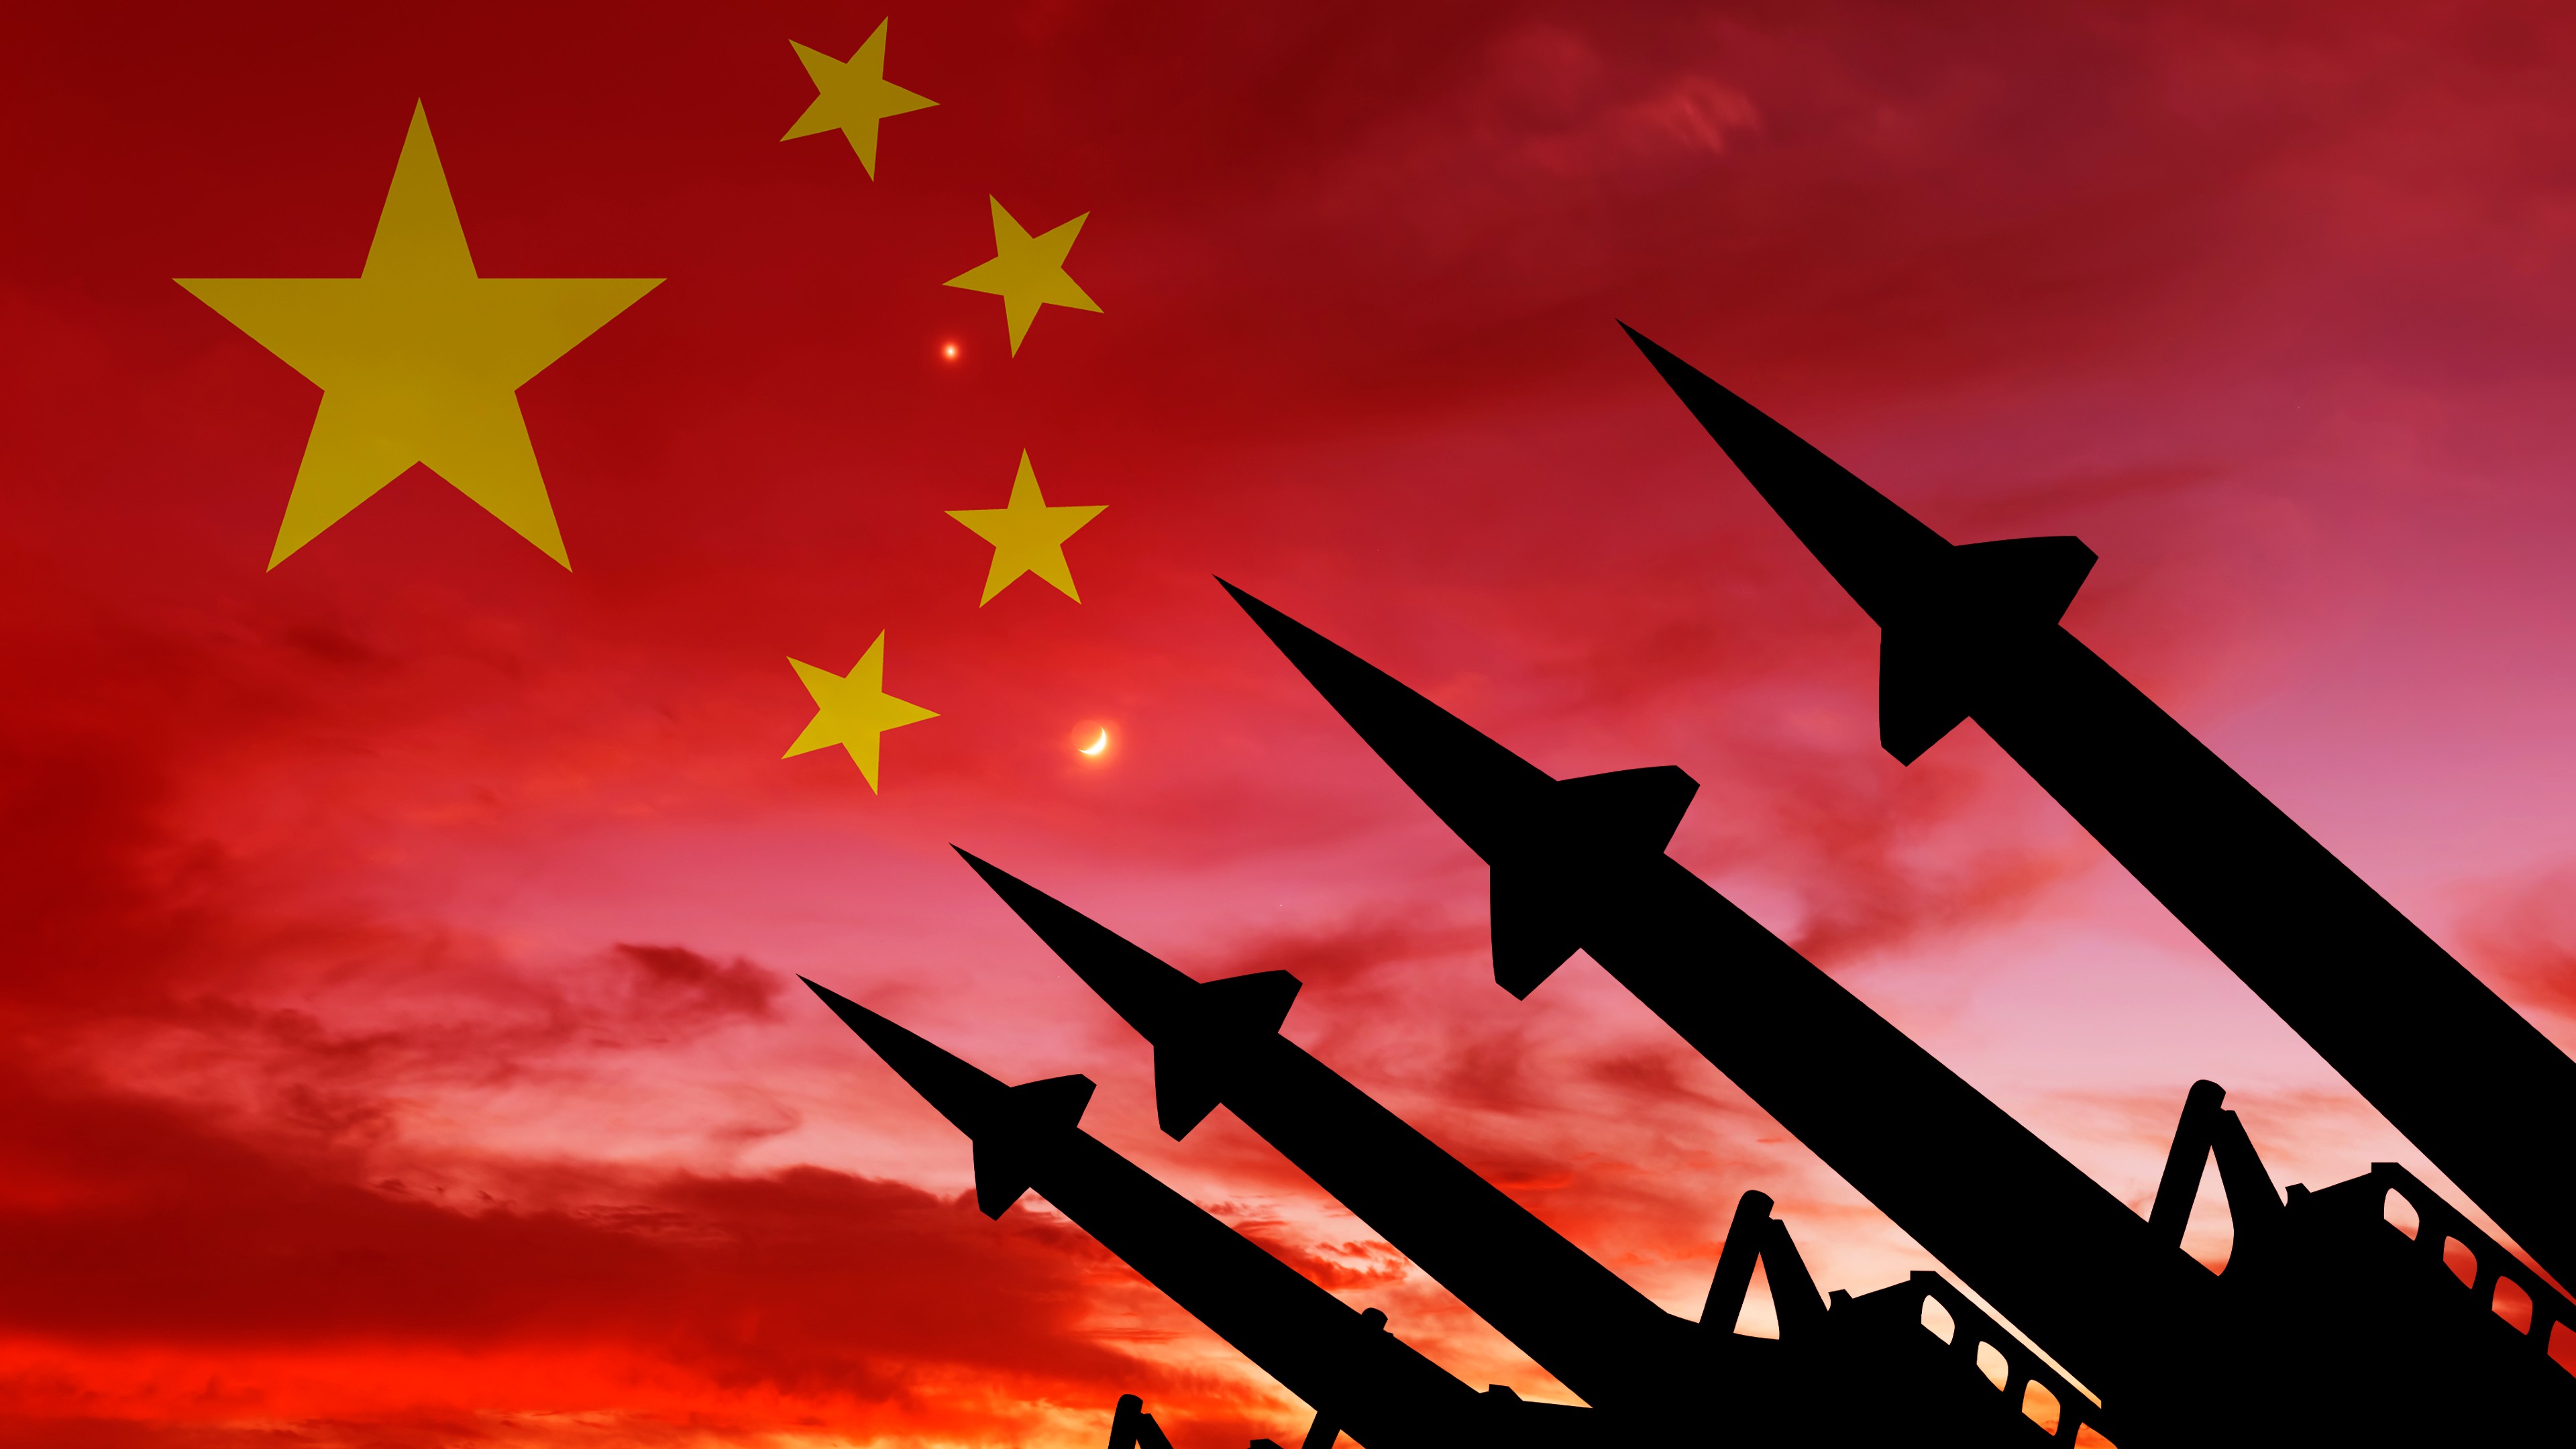 As economy falters, China strengthens its defenses